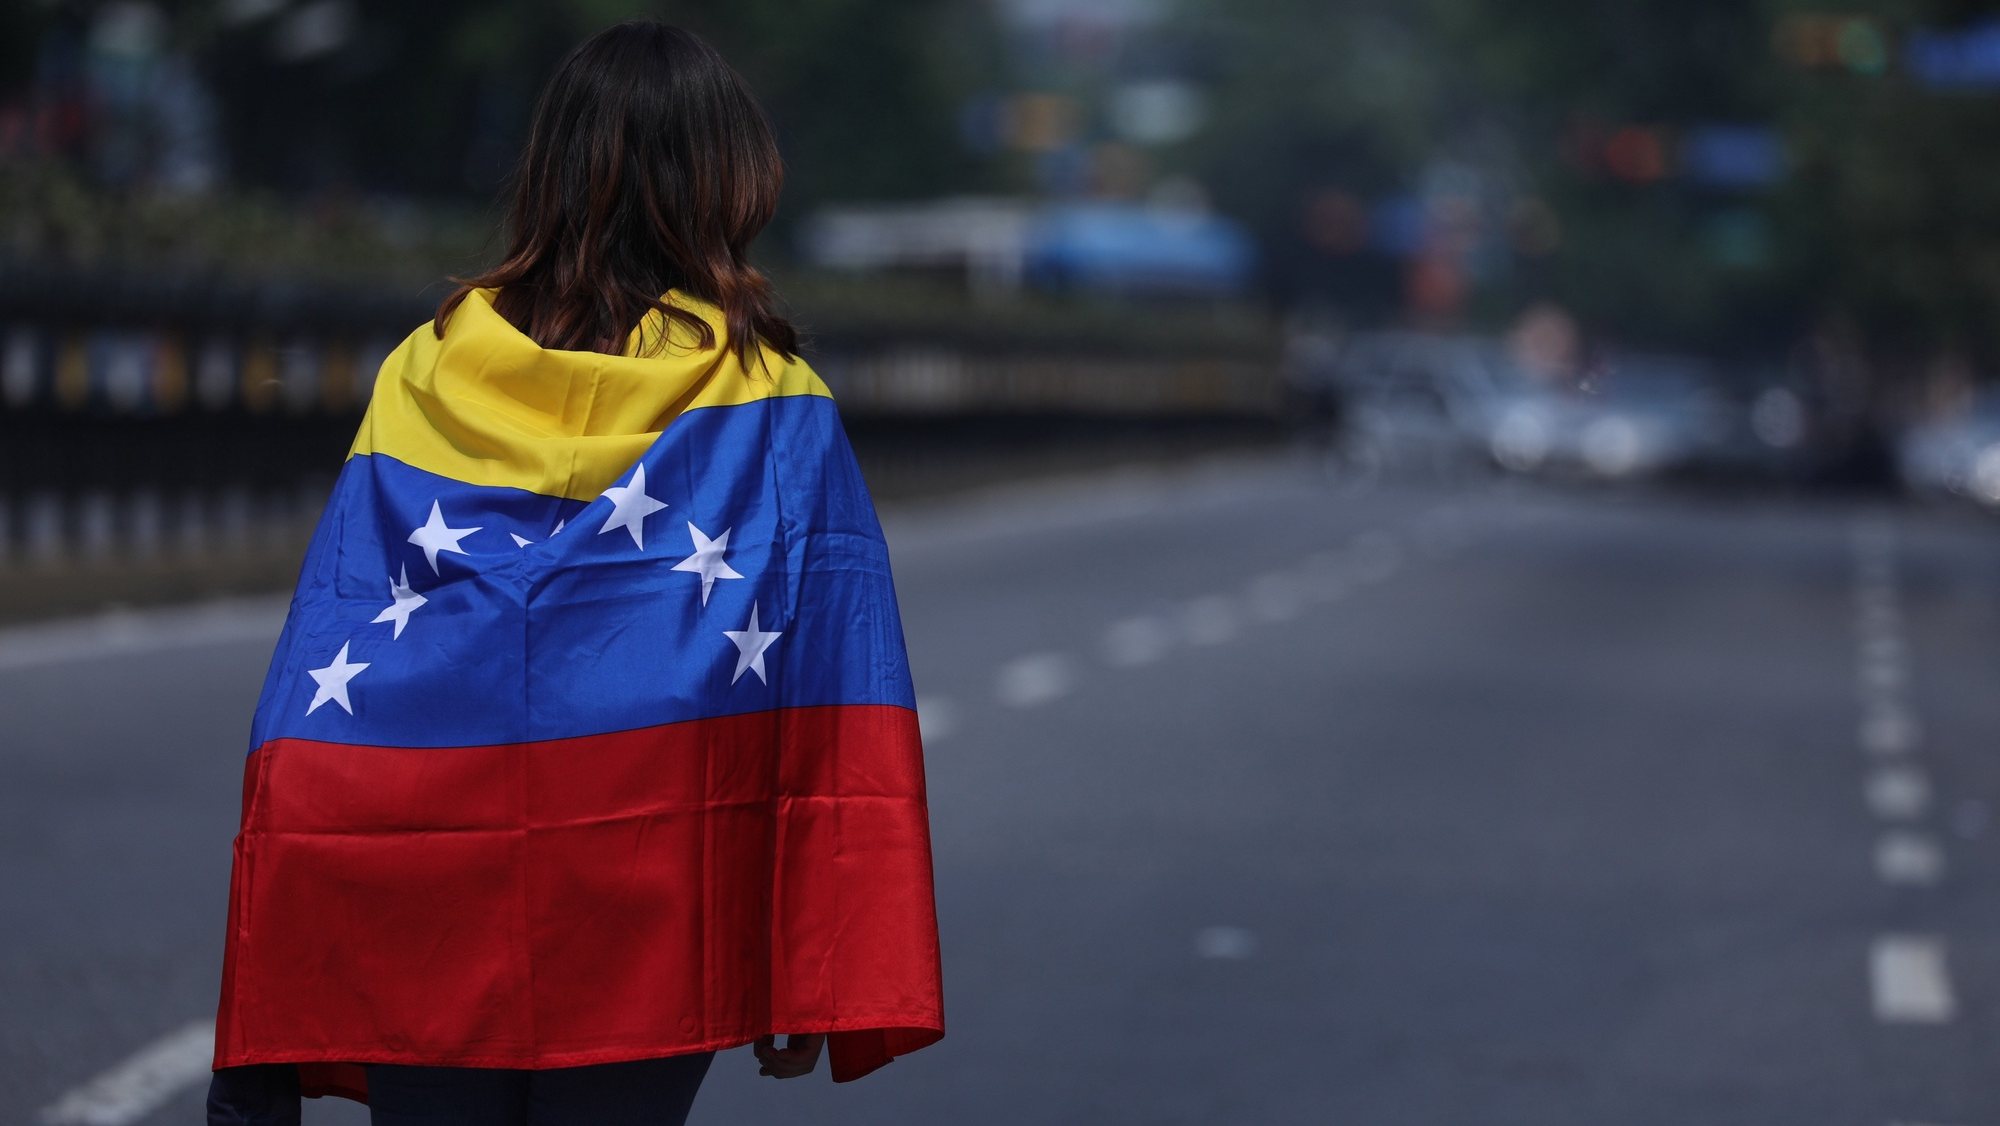 epa07497584 A woman wraps her body in a Venezuelan flag during an opposition demonstration in Caracas, Venezuela, 10 April 2019. Guaido, recognized as president of Venezuela by more than 50 countries, called a new day of mobilizations called &#039;Operation freedom&#039;, against the Government of Nicolas Maduro.  EPA/Miguel GutiÃ©rrez